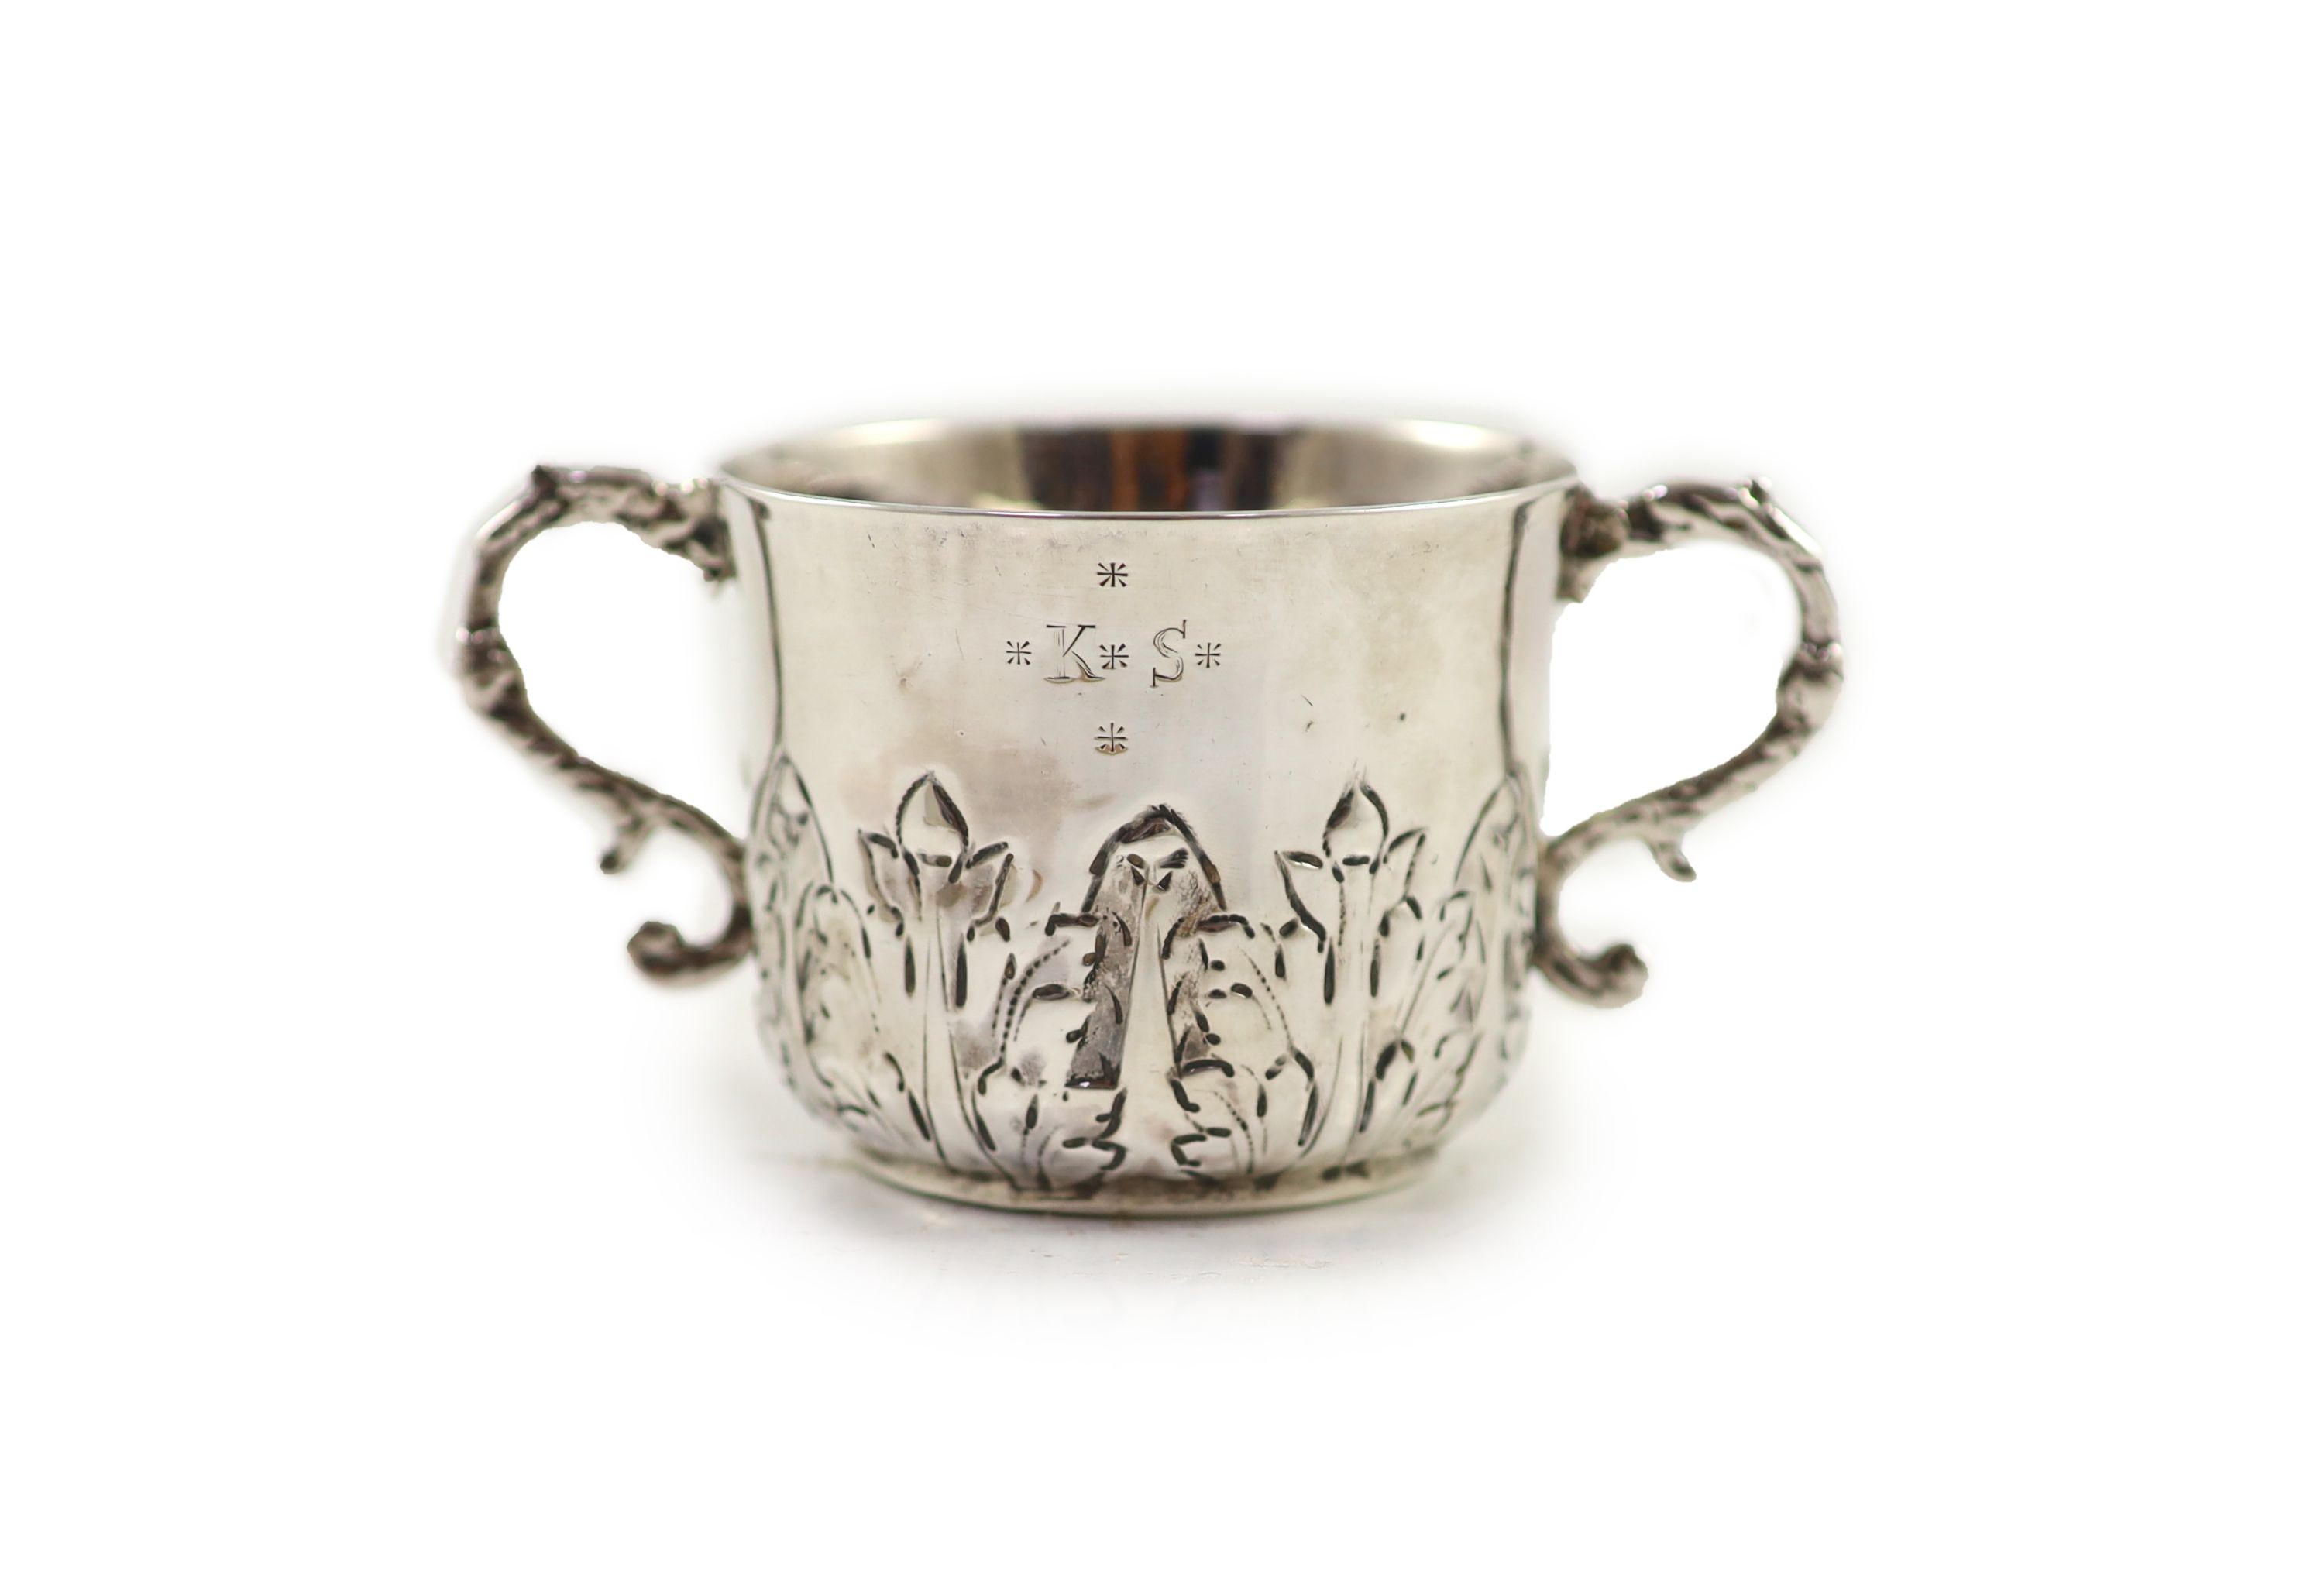 A William III repousse silver porringer, by Jonah Kirk, London c.1695